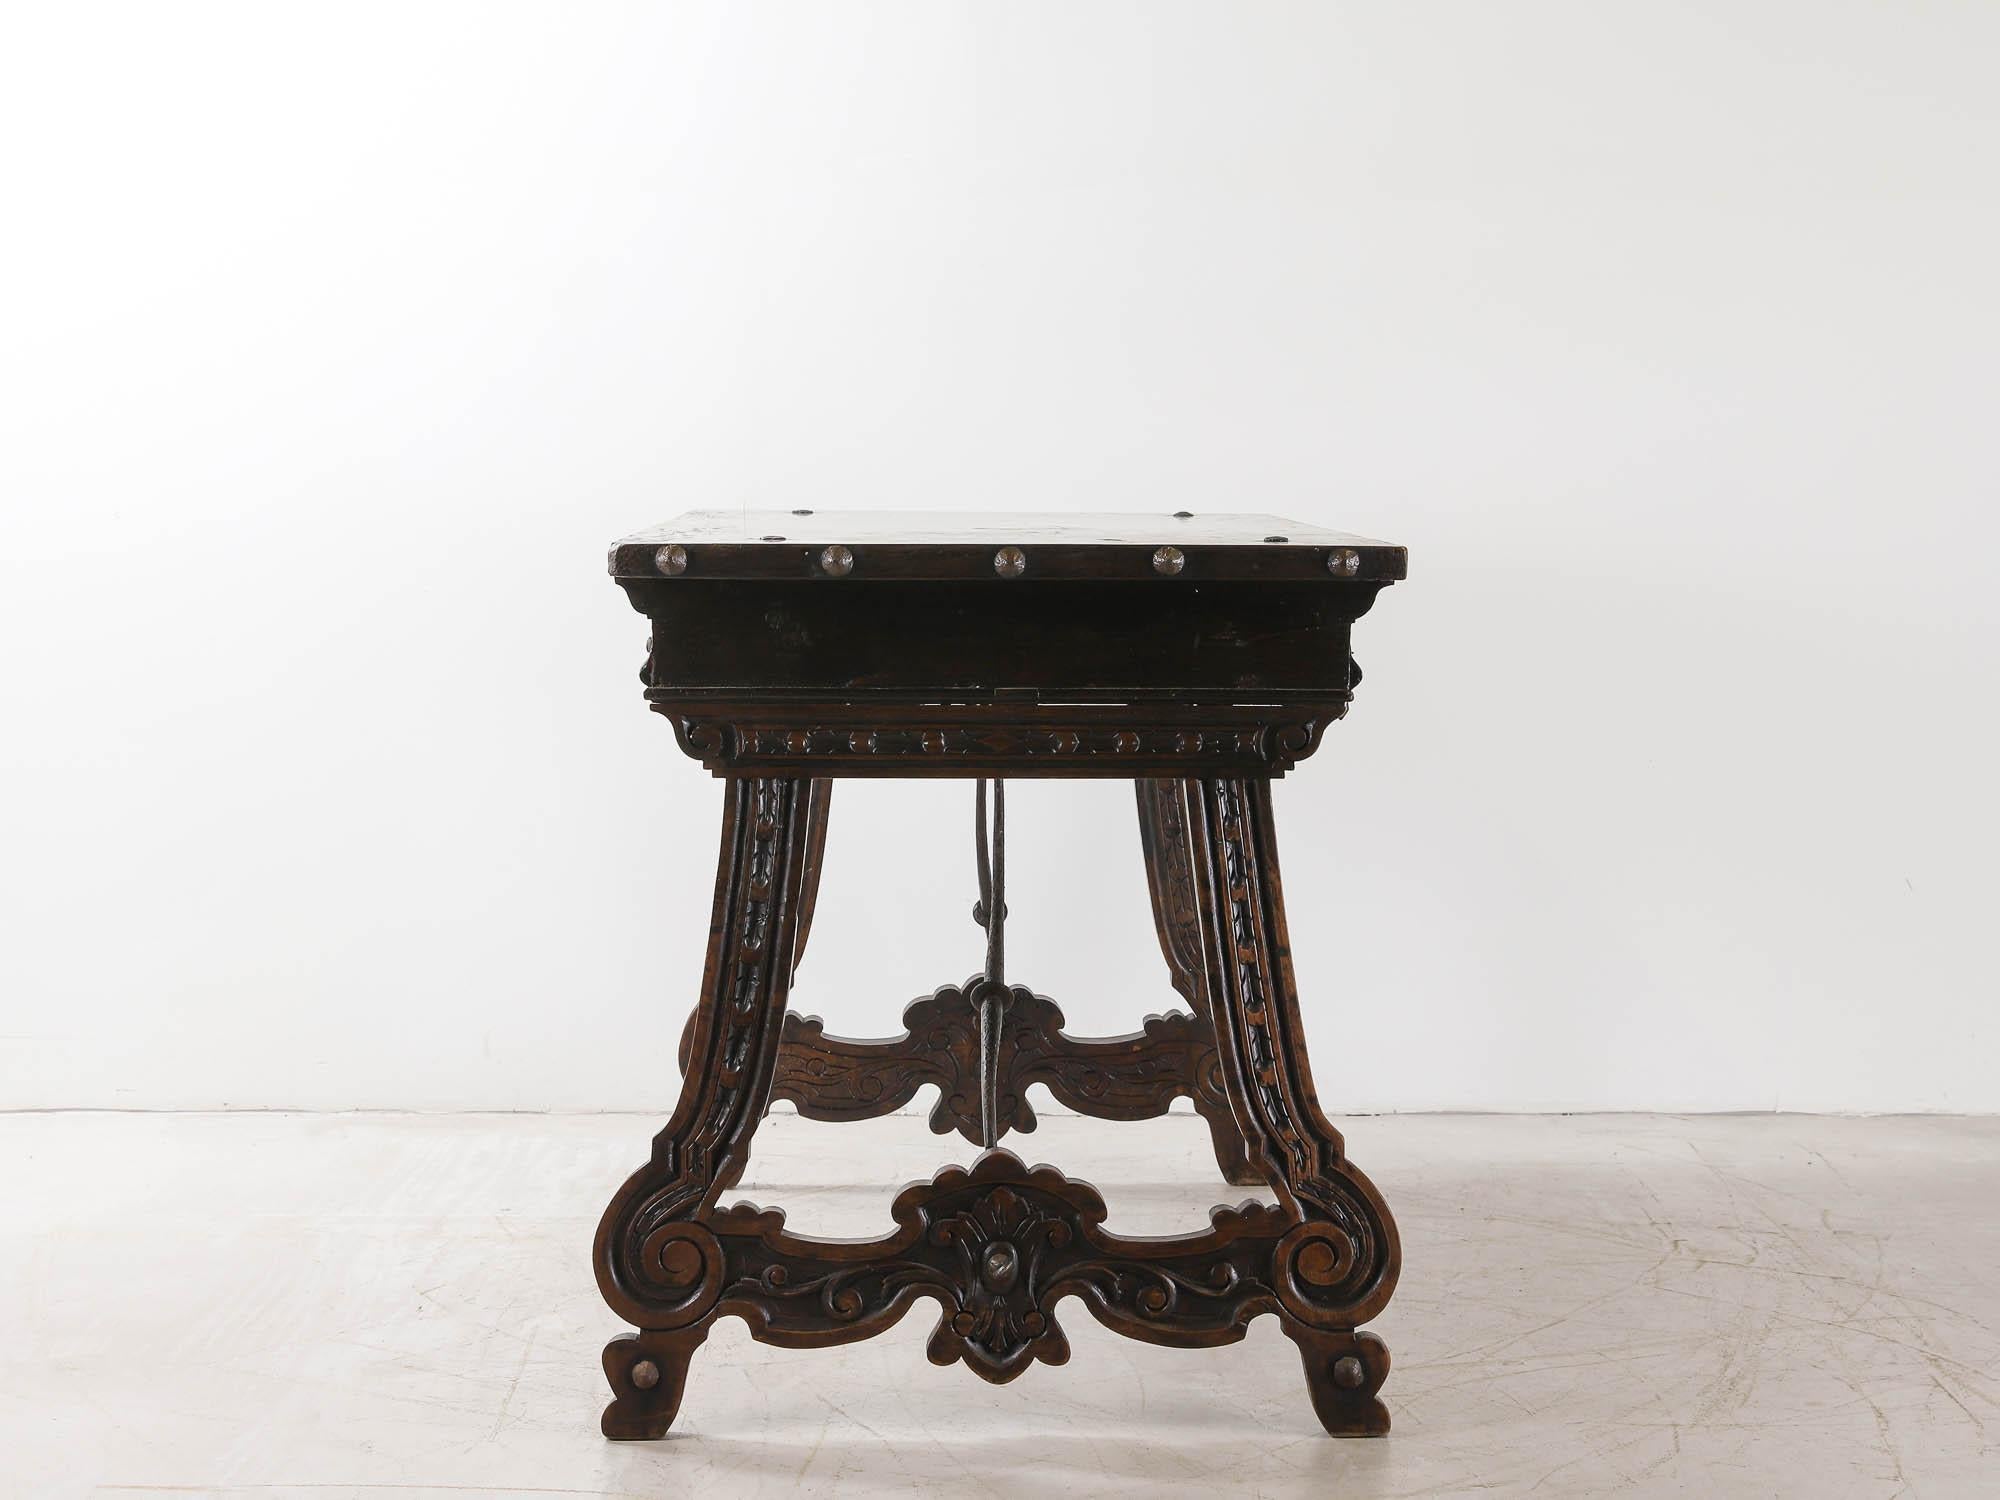 Neoclassical Revival Spanish 19th Century Neo- Renaissance Carved Chestnut Table For Sale